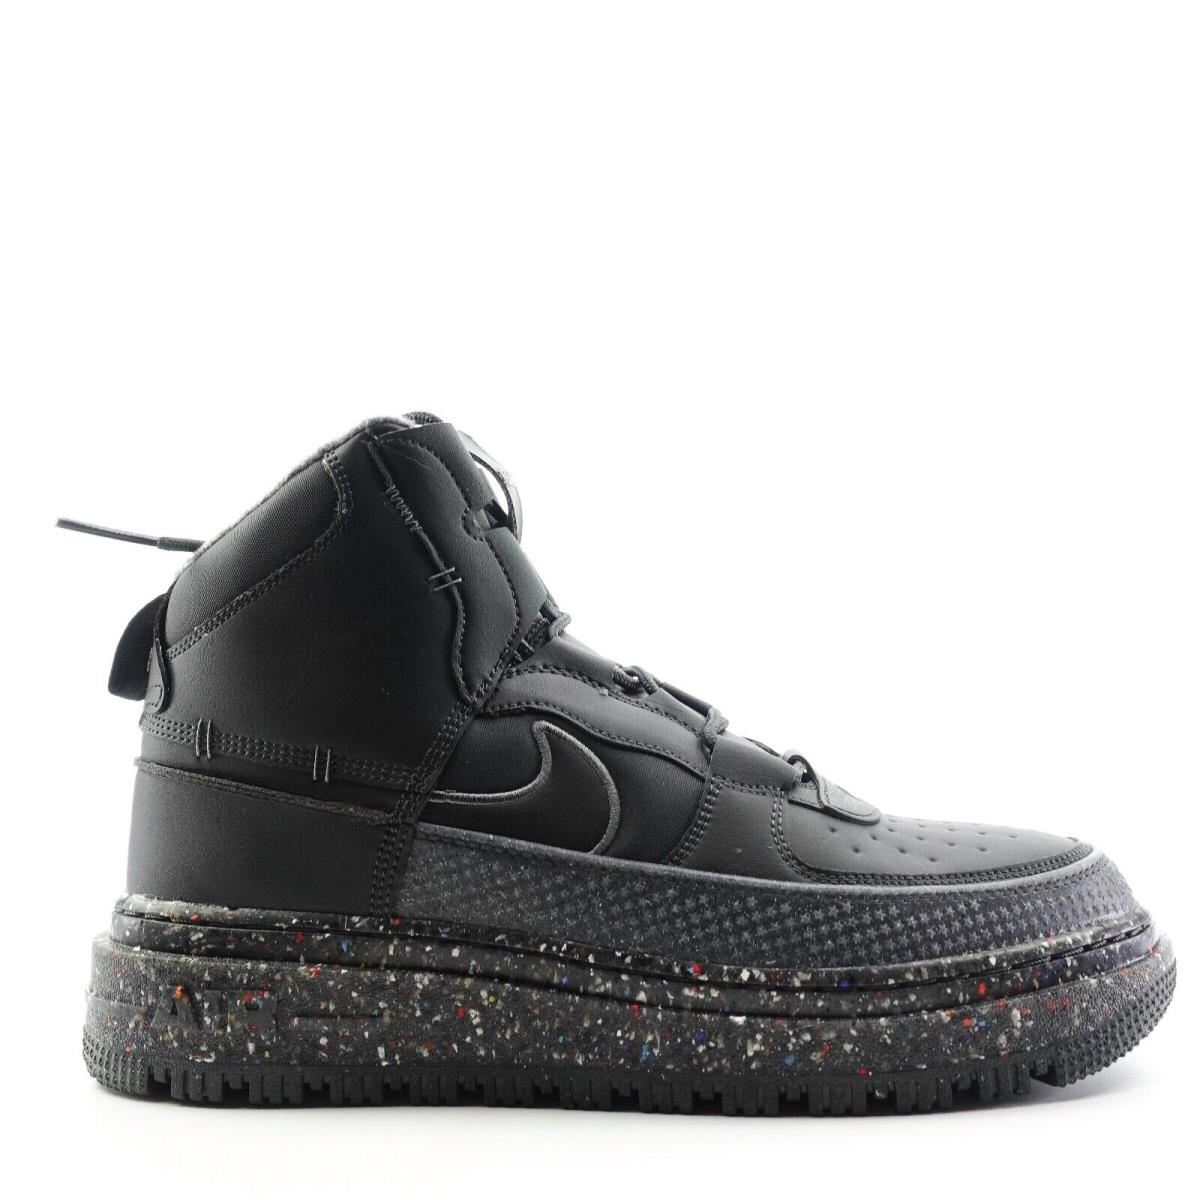 Nike Air Force 1 Boot NN Dark Smoke Grey Crater Shoes DD0747-001 Men s Size 12